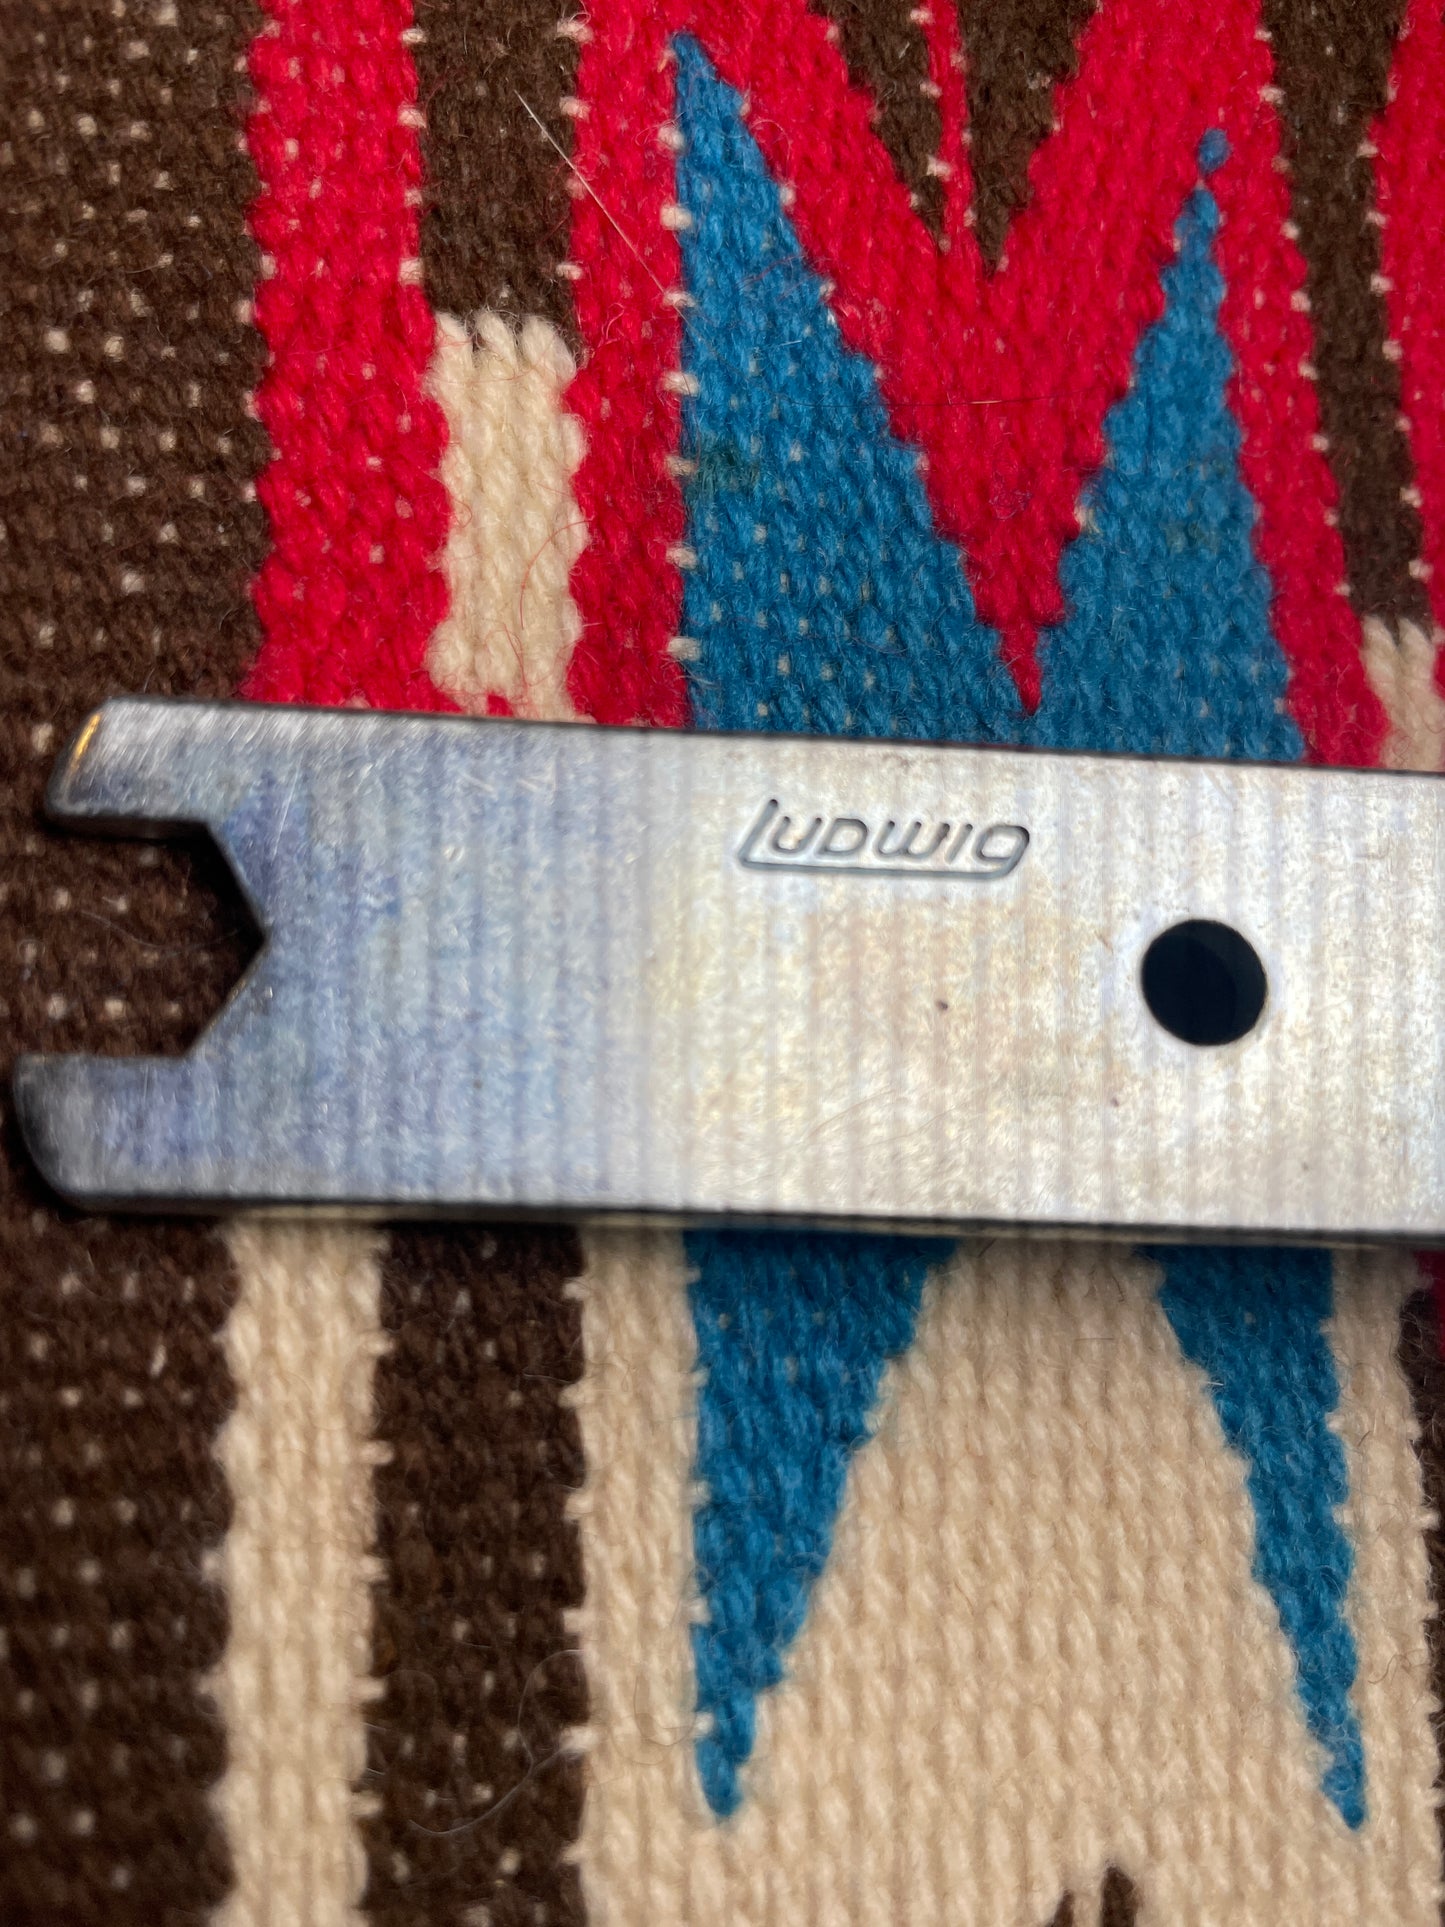 1960s-1970s Ludwig Drum Rail Console Wrench Key